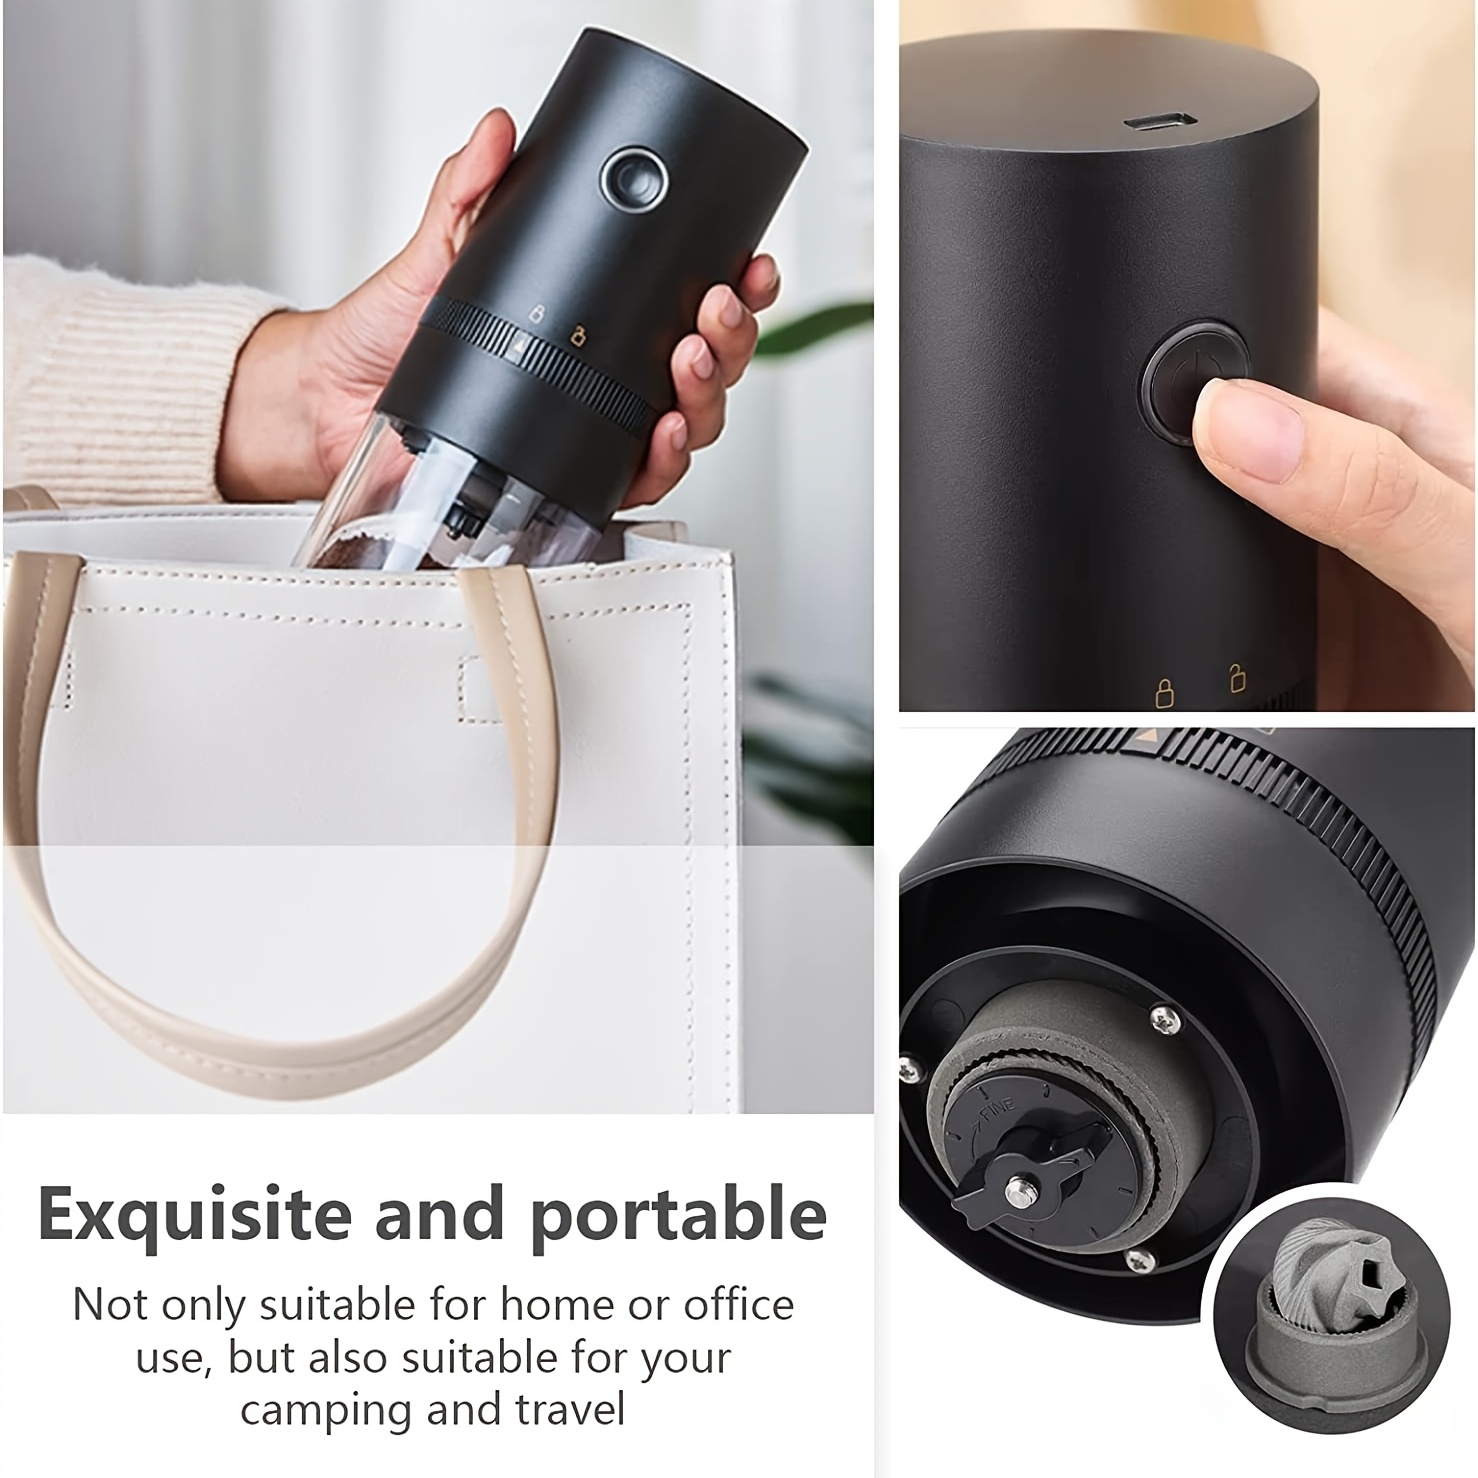 Electric Coffee Grinder New Upgrade Mini Portable Coffee Bean Grinder